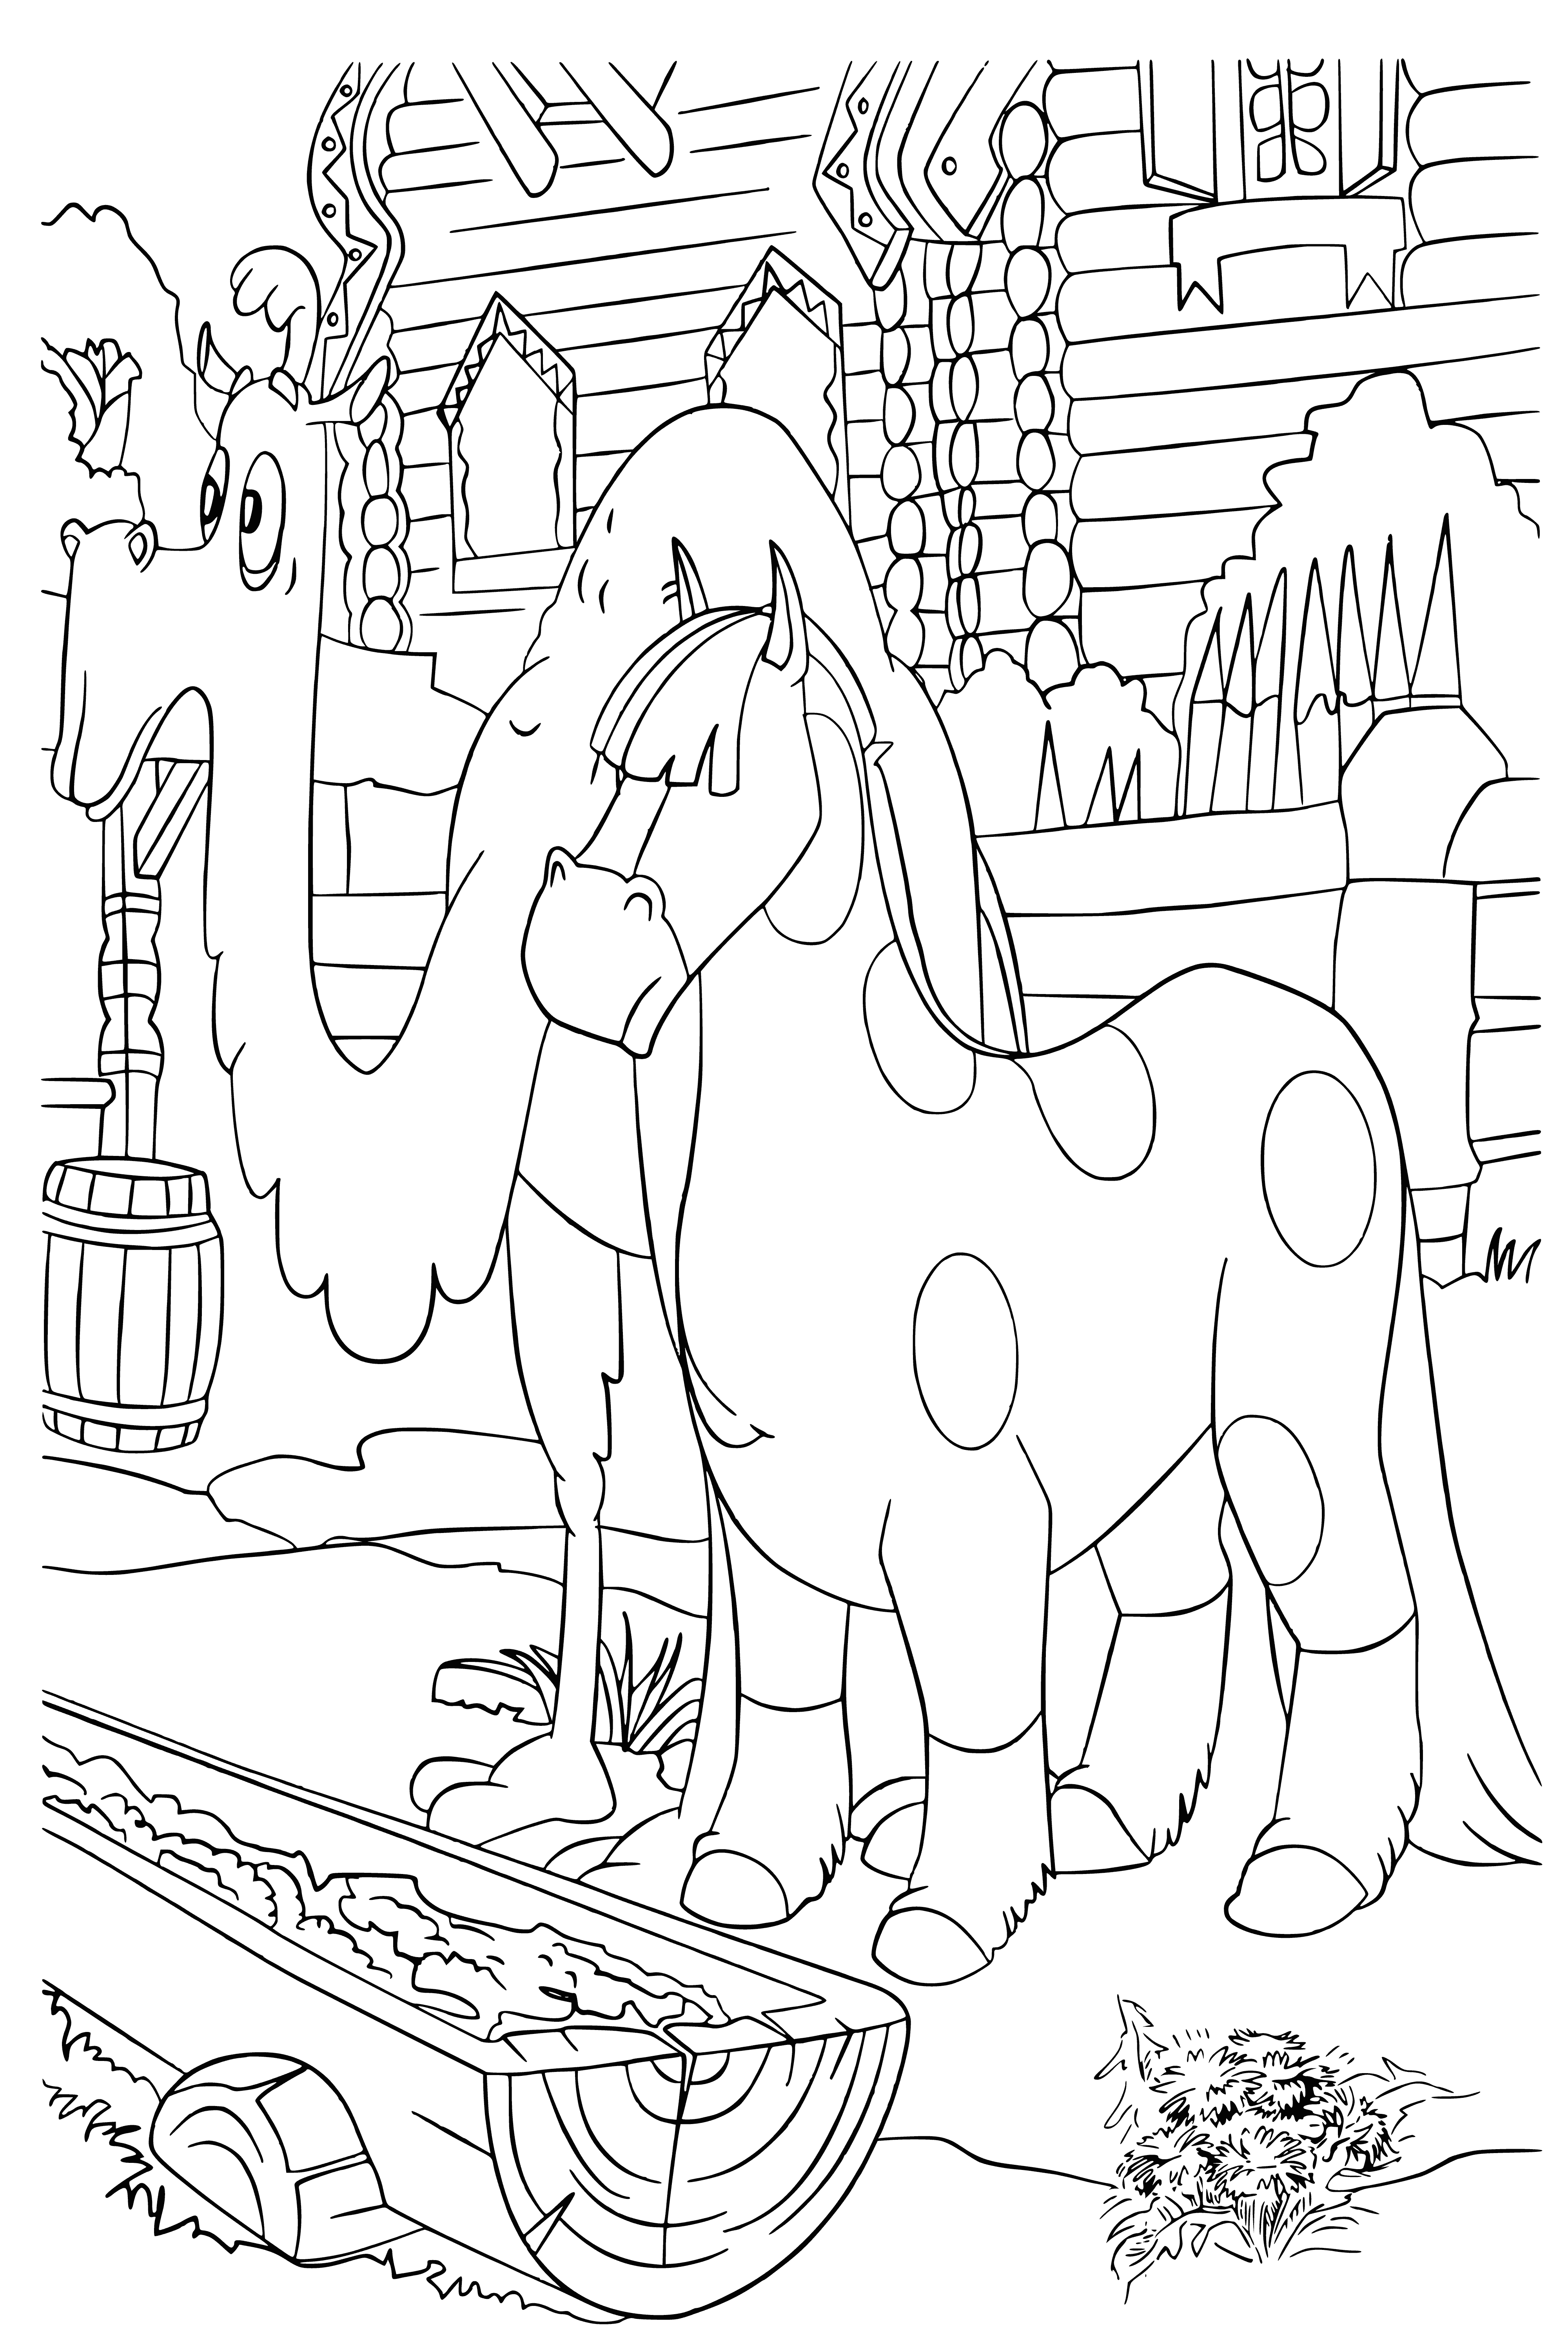 coloring page: Man on horse and camel faces large coiled snake around tree. Camel brays, man has spear with determined look. #snake #nature #mystery